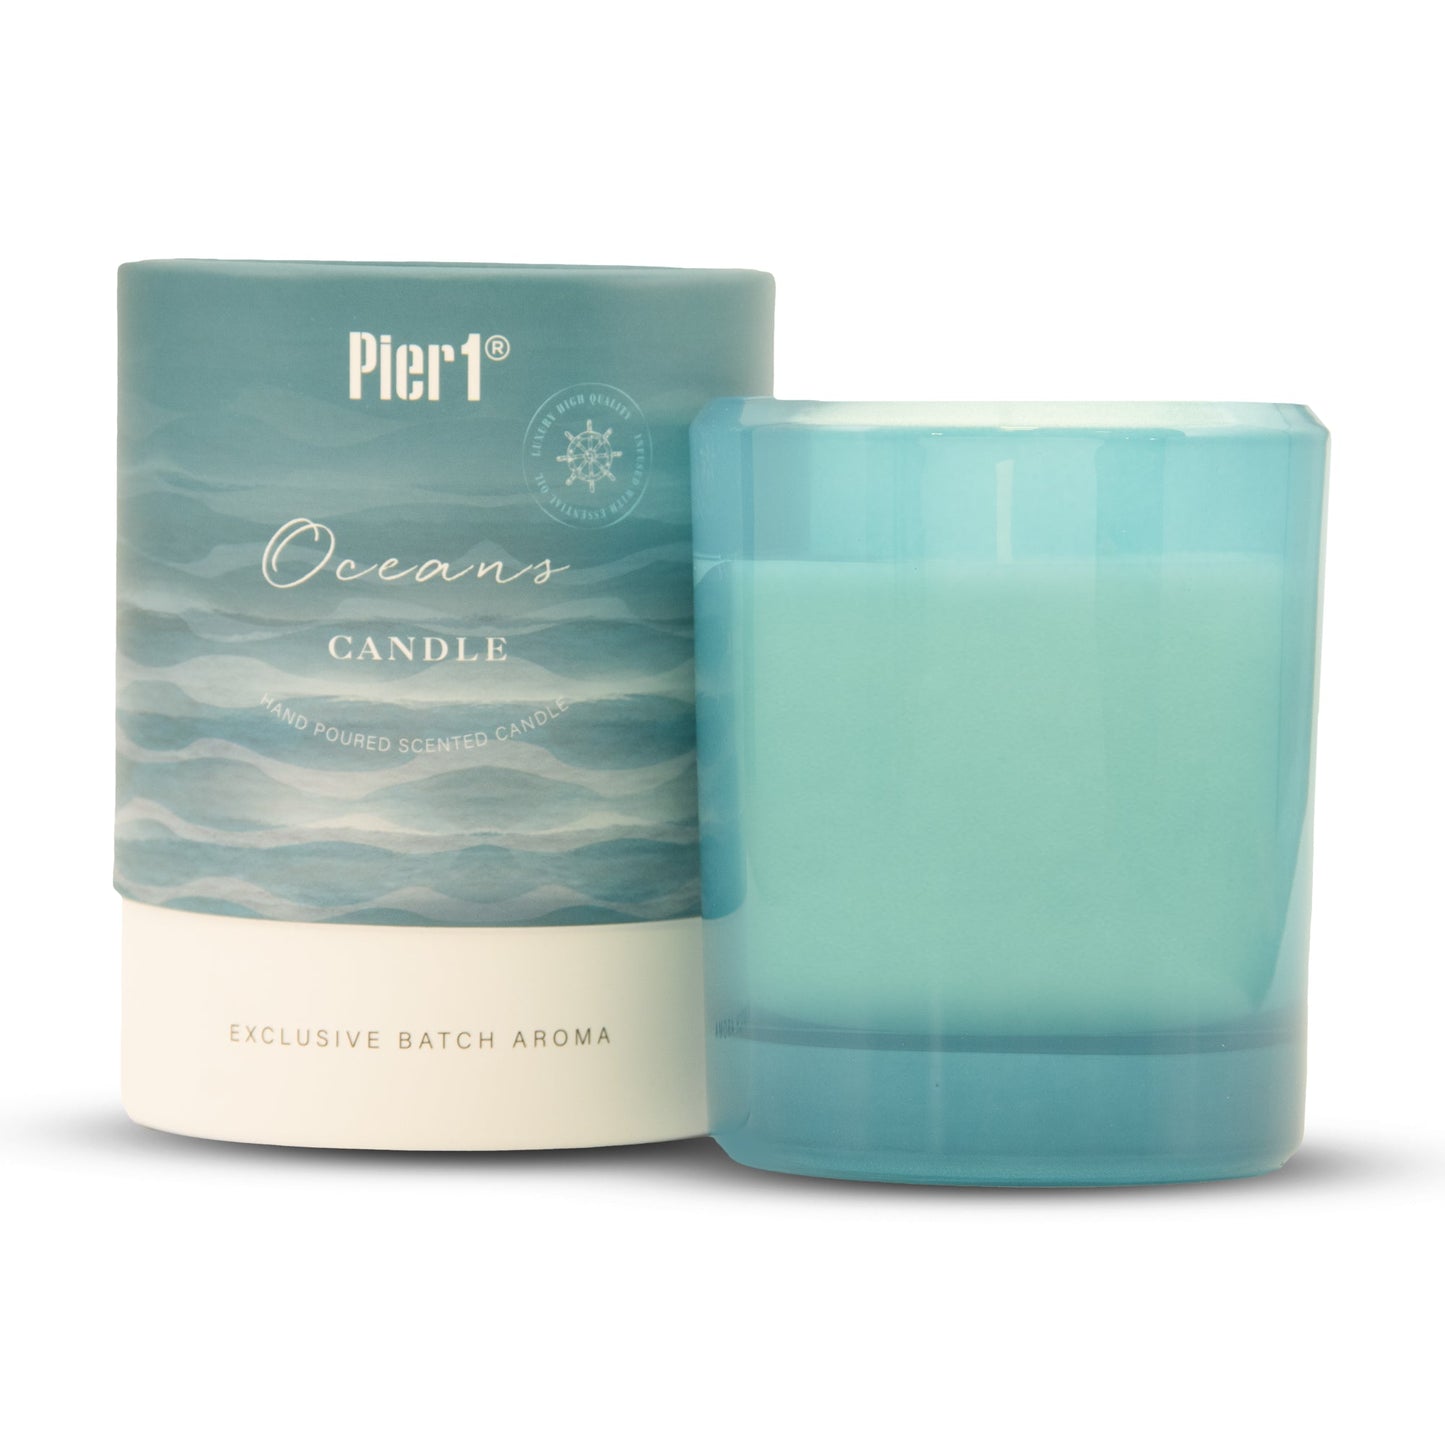 Pier 1 Oceans Boxed Soy Candle 8oz - The Home Resolution